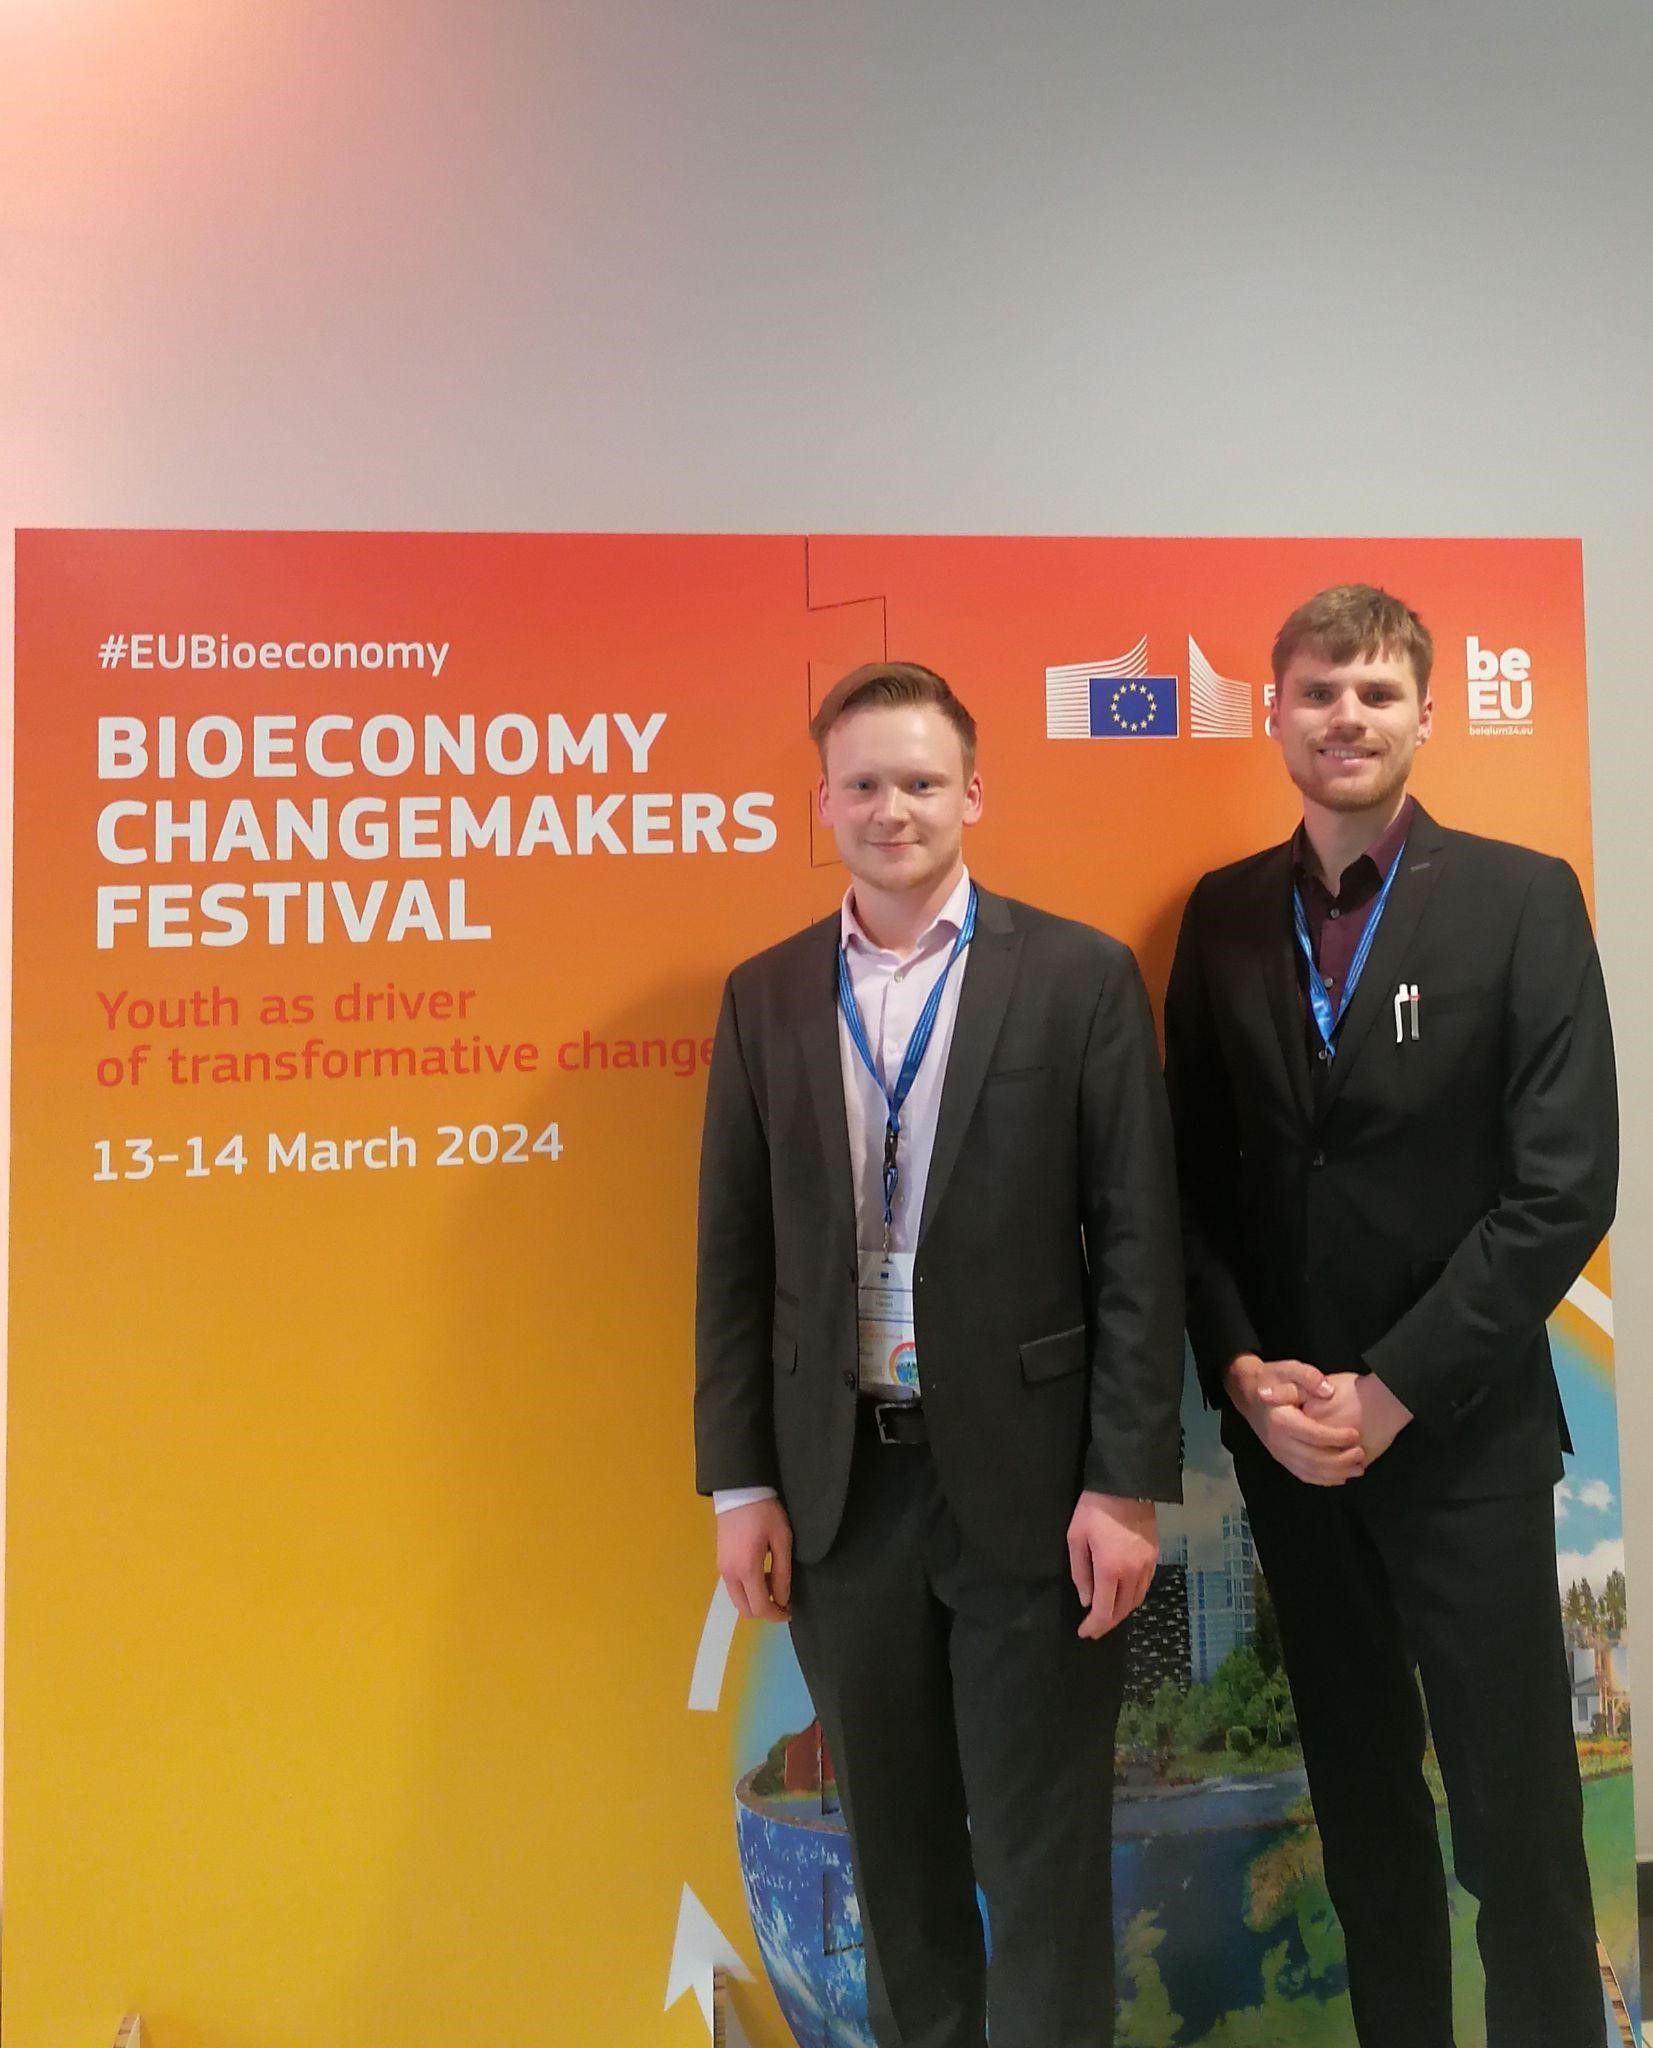 GASB representatives Florian Hänsel and Tim Render (left to right) at the High-level event of the EU Bioeconomy Changemakers Festival in Brussels 